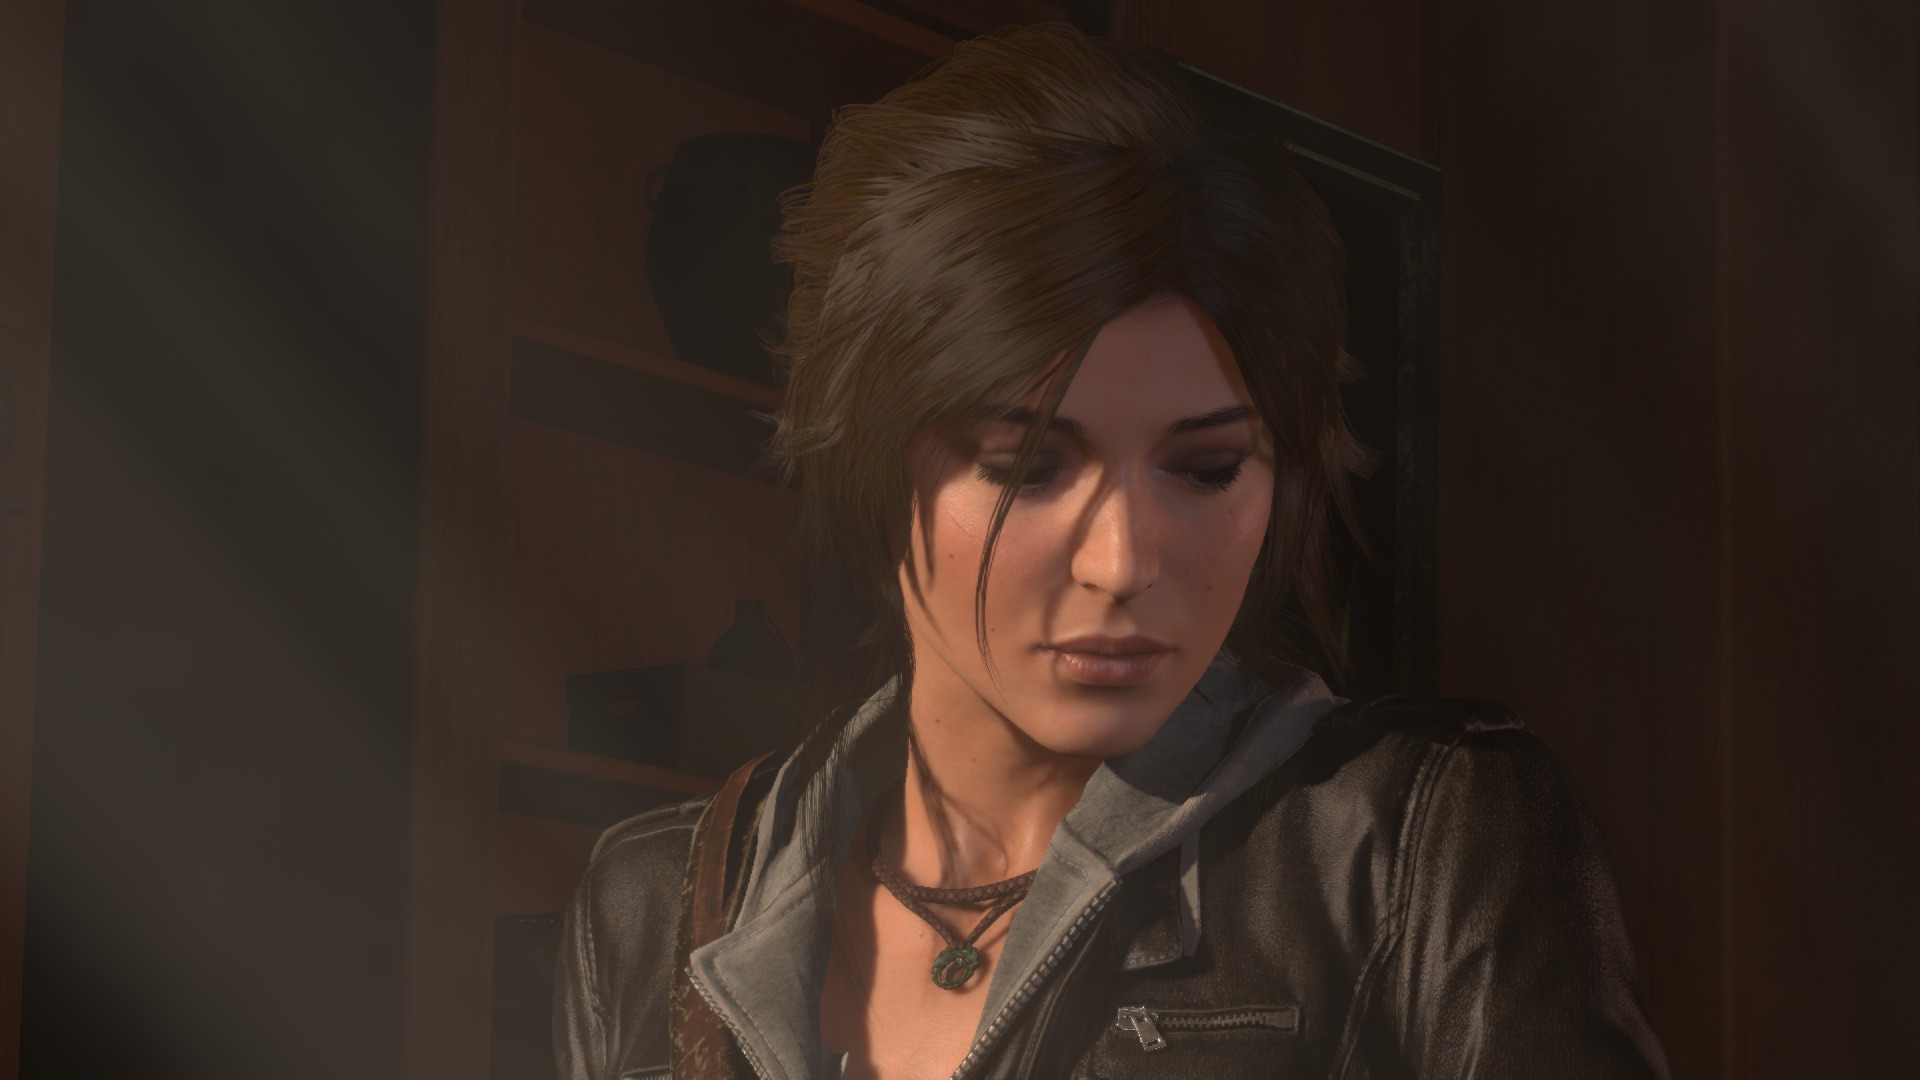 General 1920x1080 Rise of the Tomb Raider looking away black jackets brunette necklace brown eyes frontal view pink lipstick Lara Croft (Tomb Raider) screen shot video games PC gaming